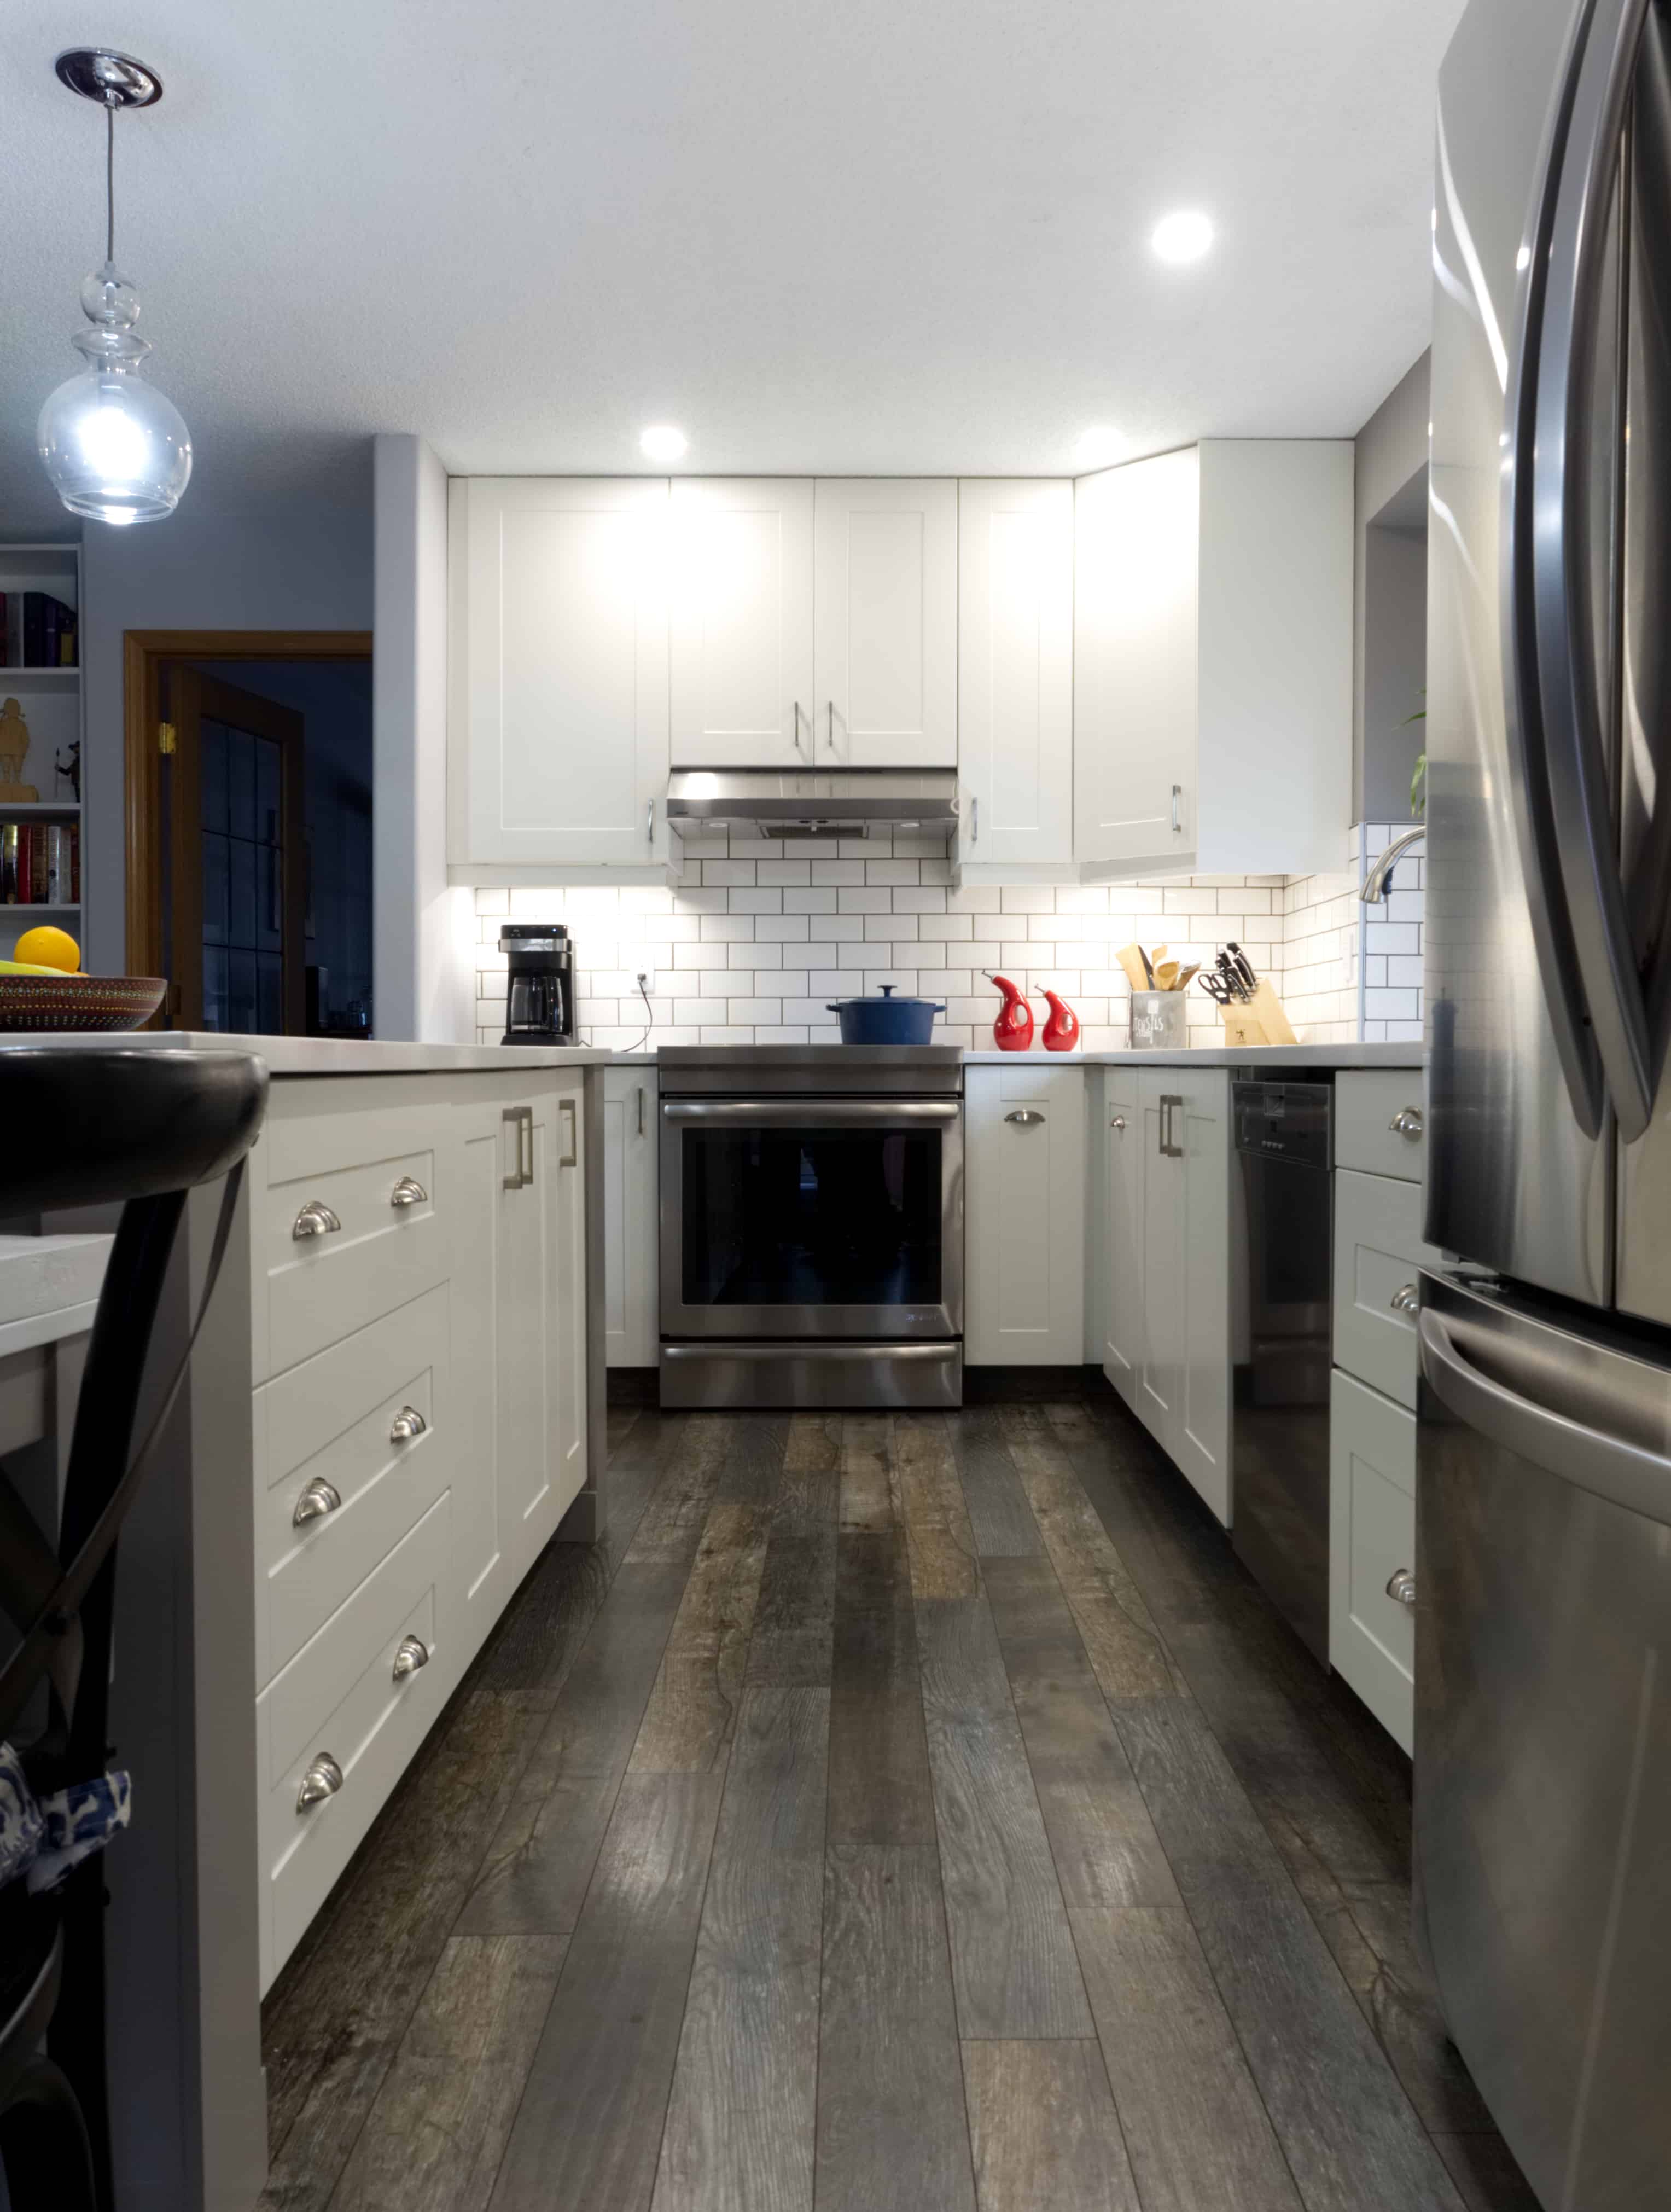 Ikea Kitchen Review Pros Cons And, How Much Does Ikea Kitchen Cost Canada